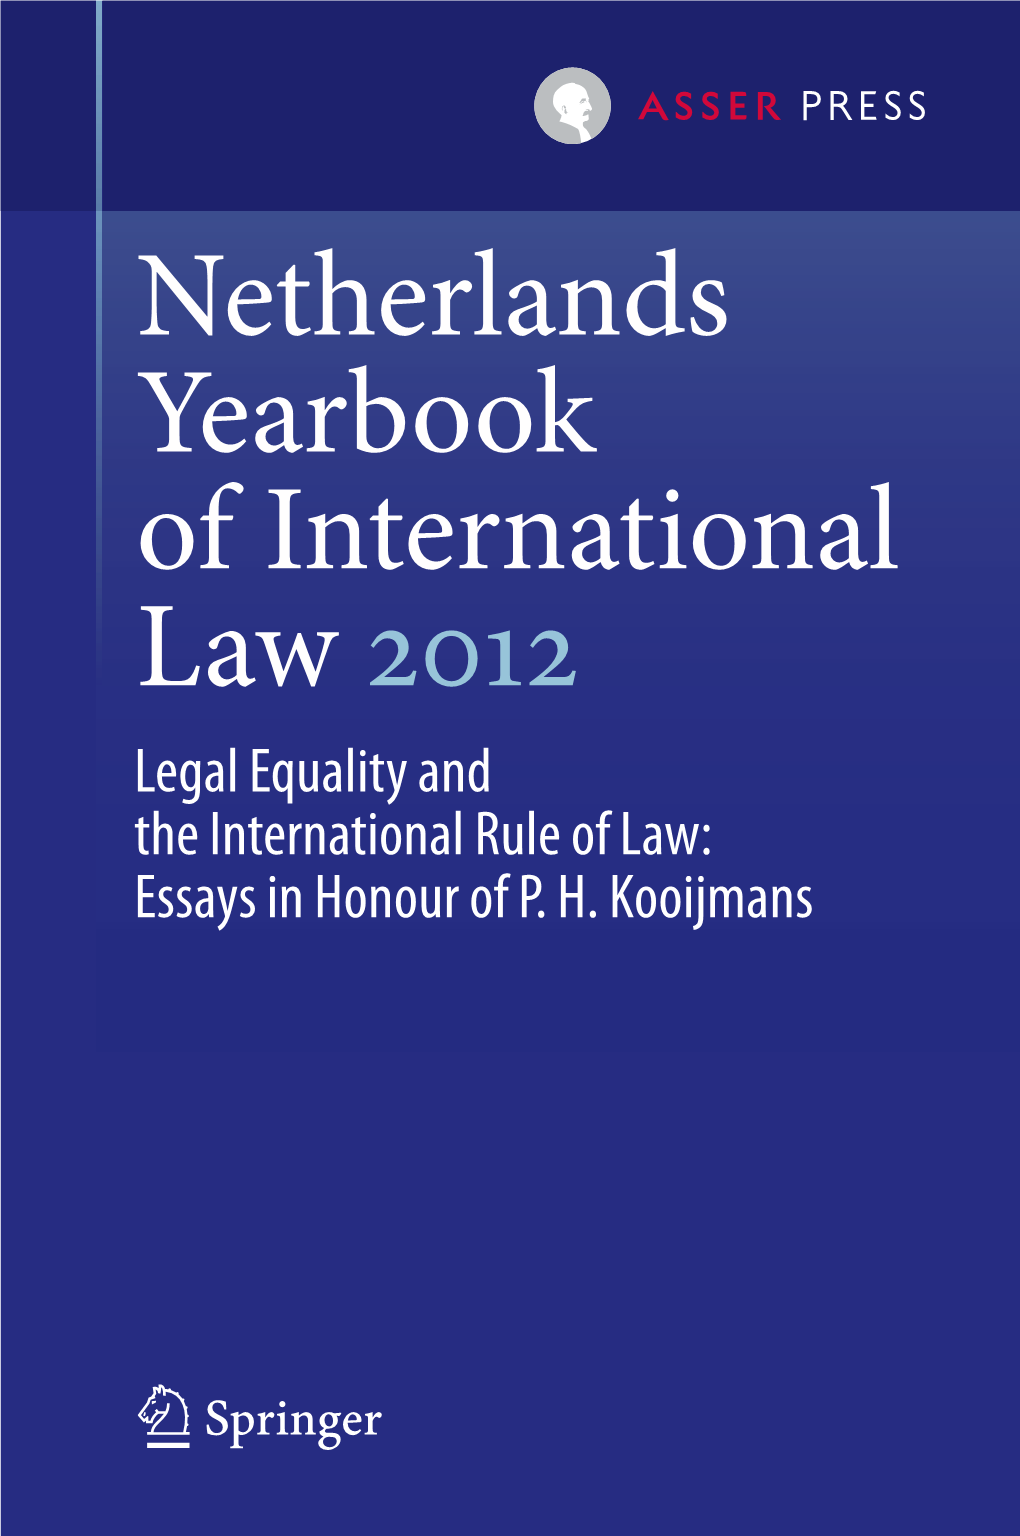 Netherlands Yearbook of International Law 2012 Legal Equality and the International Rule of Law: Essays in Honour of P